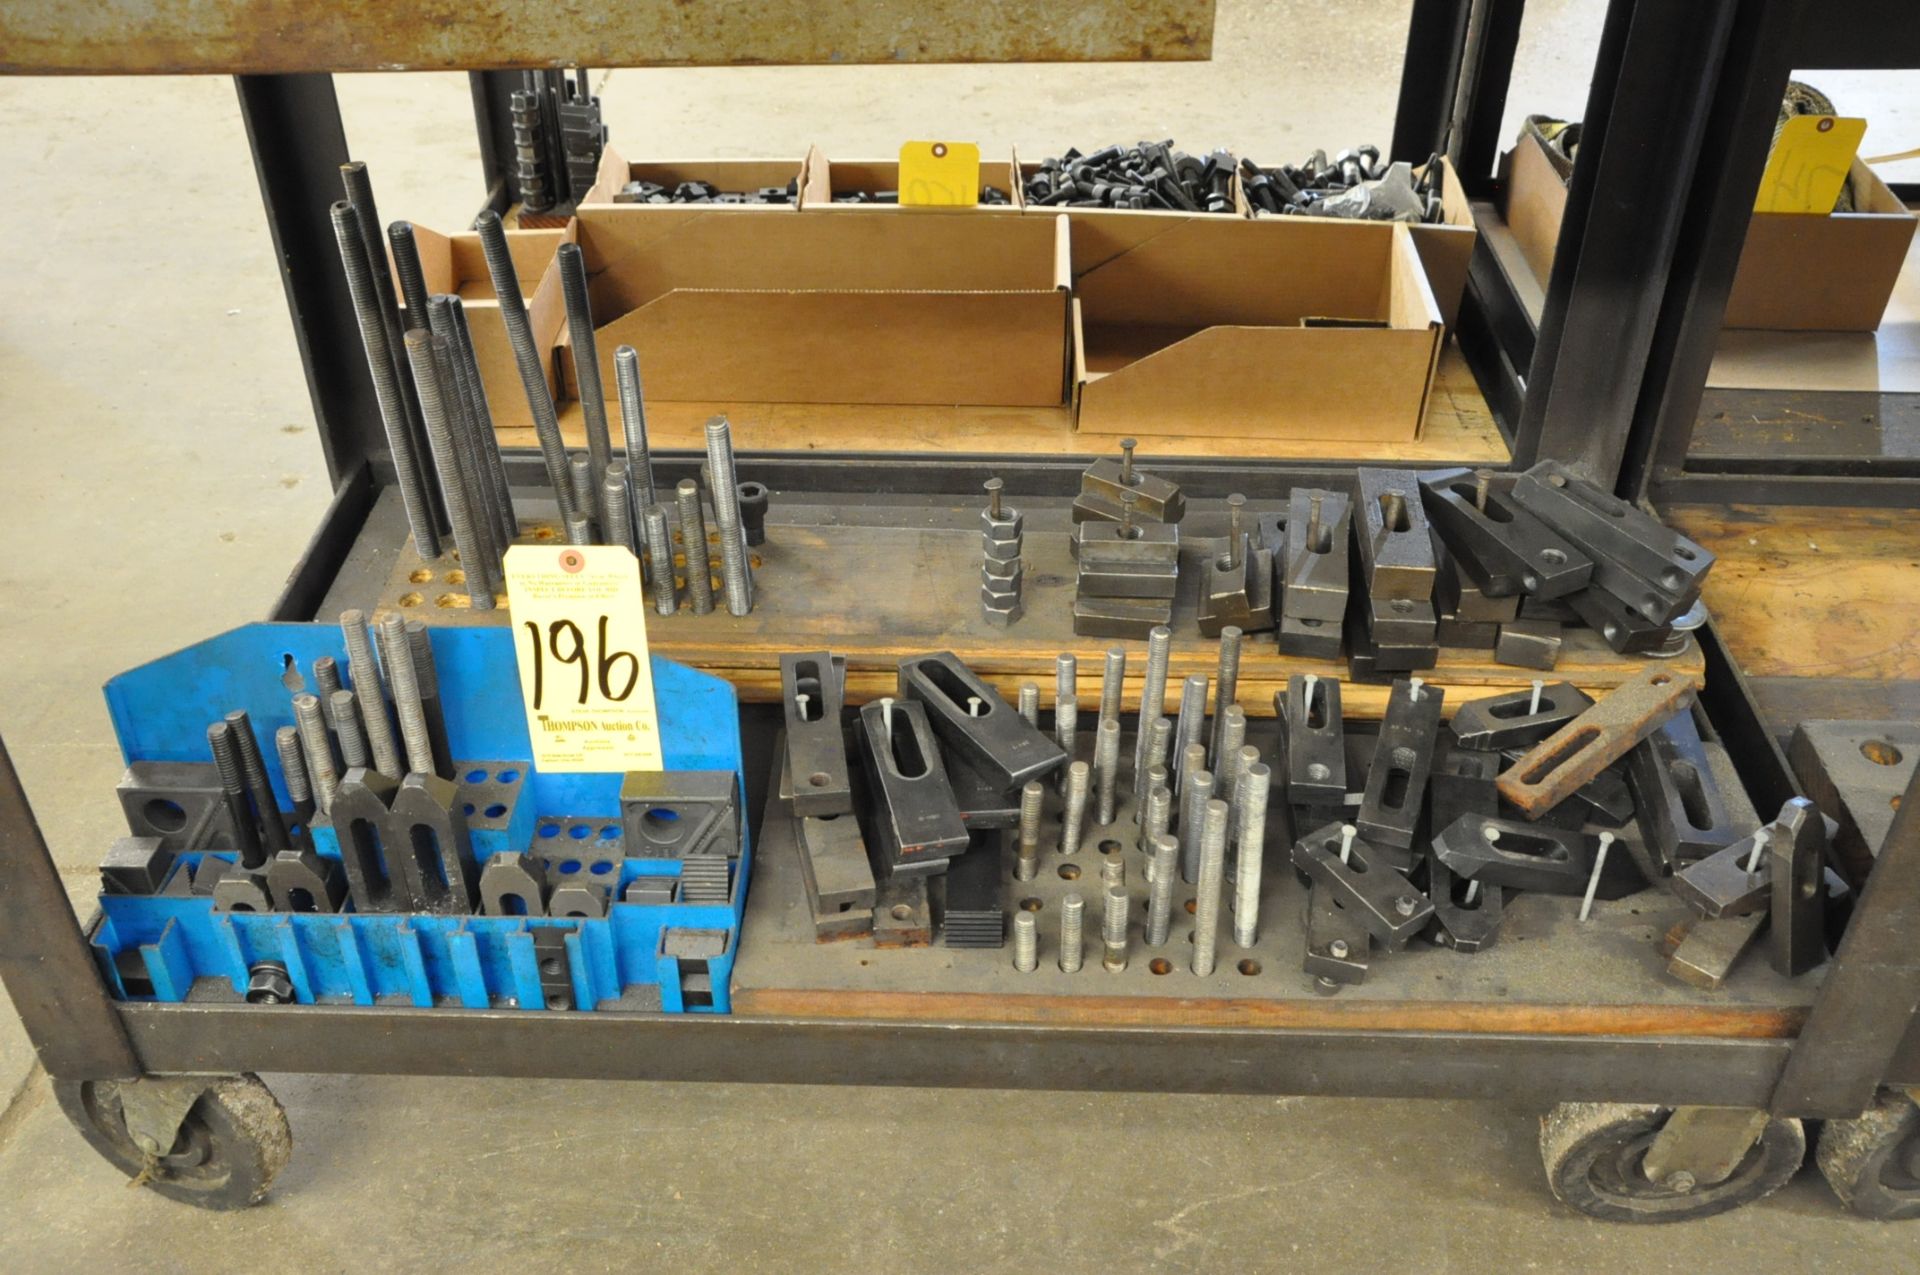 Lot, Hold Down Tooling with Stands Under (2) Benches